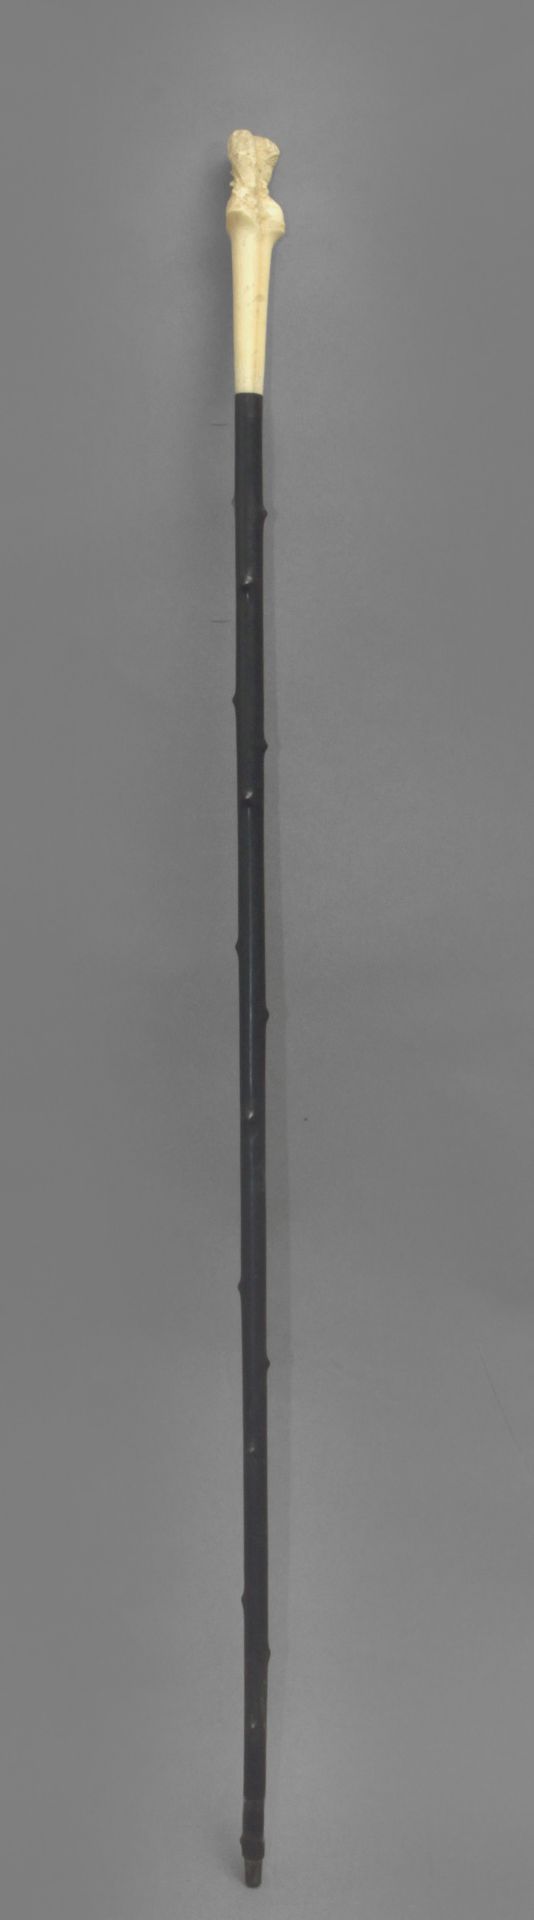 A 19th century walking stick. - Image 6 of 8